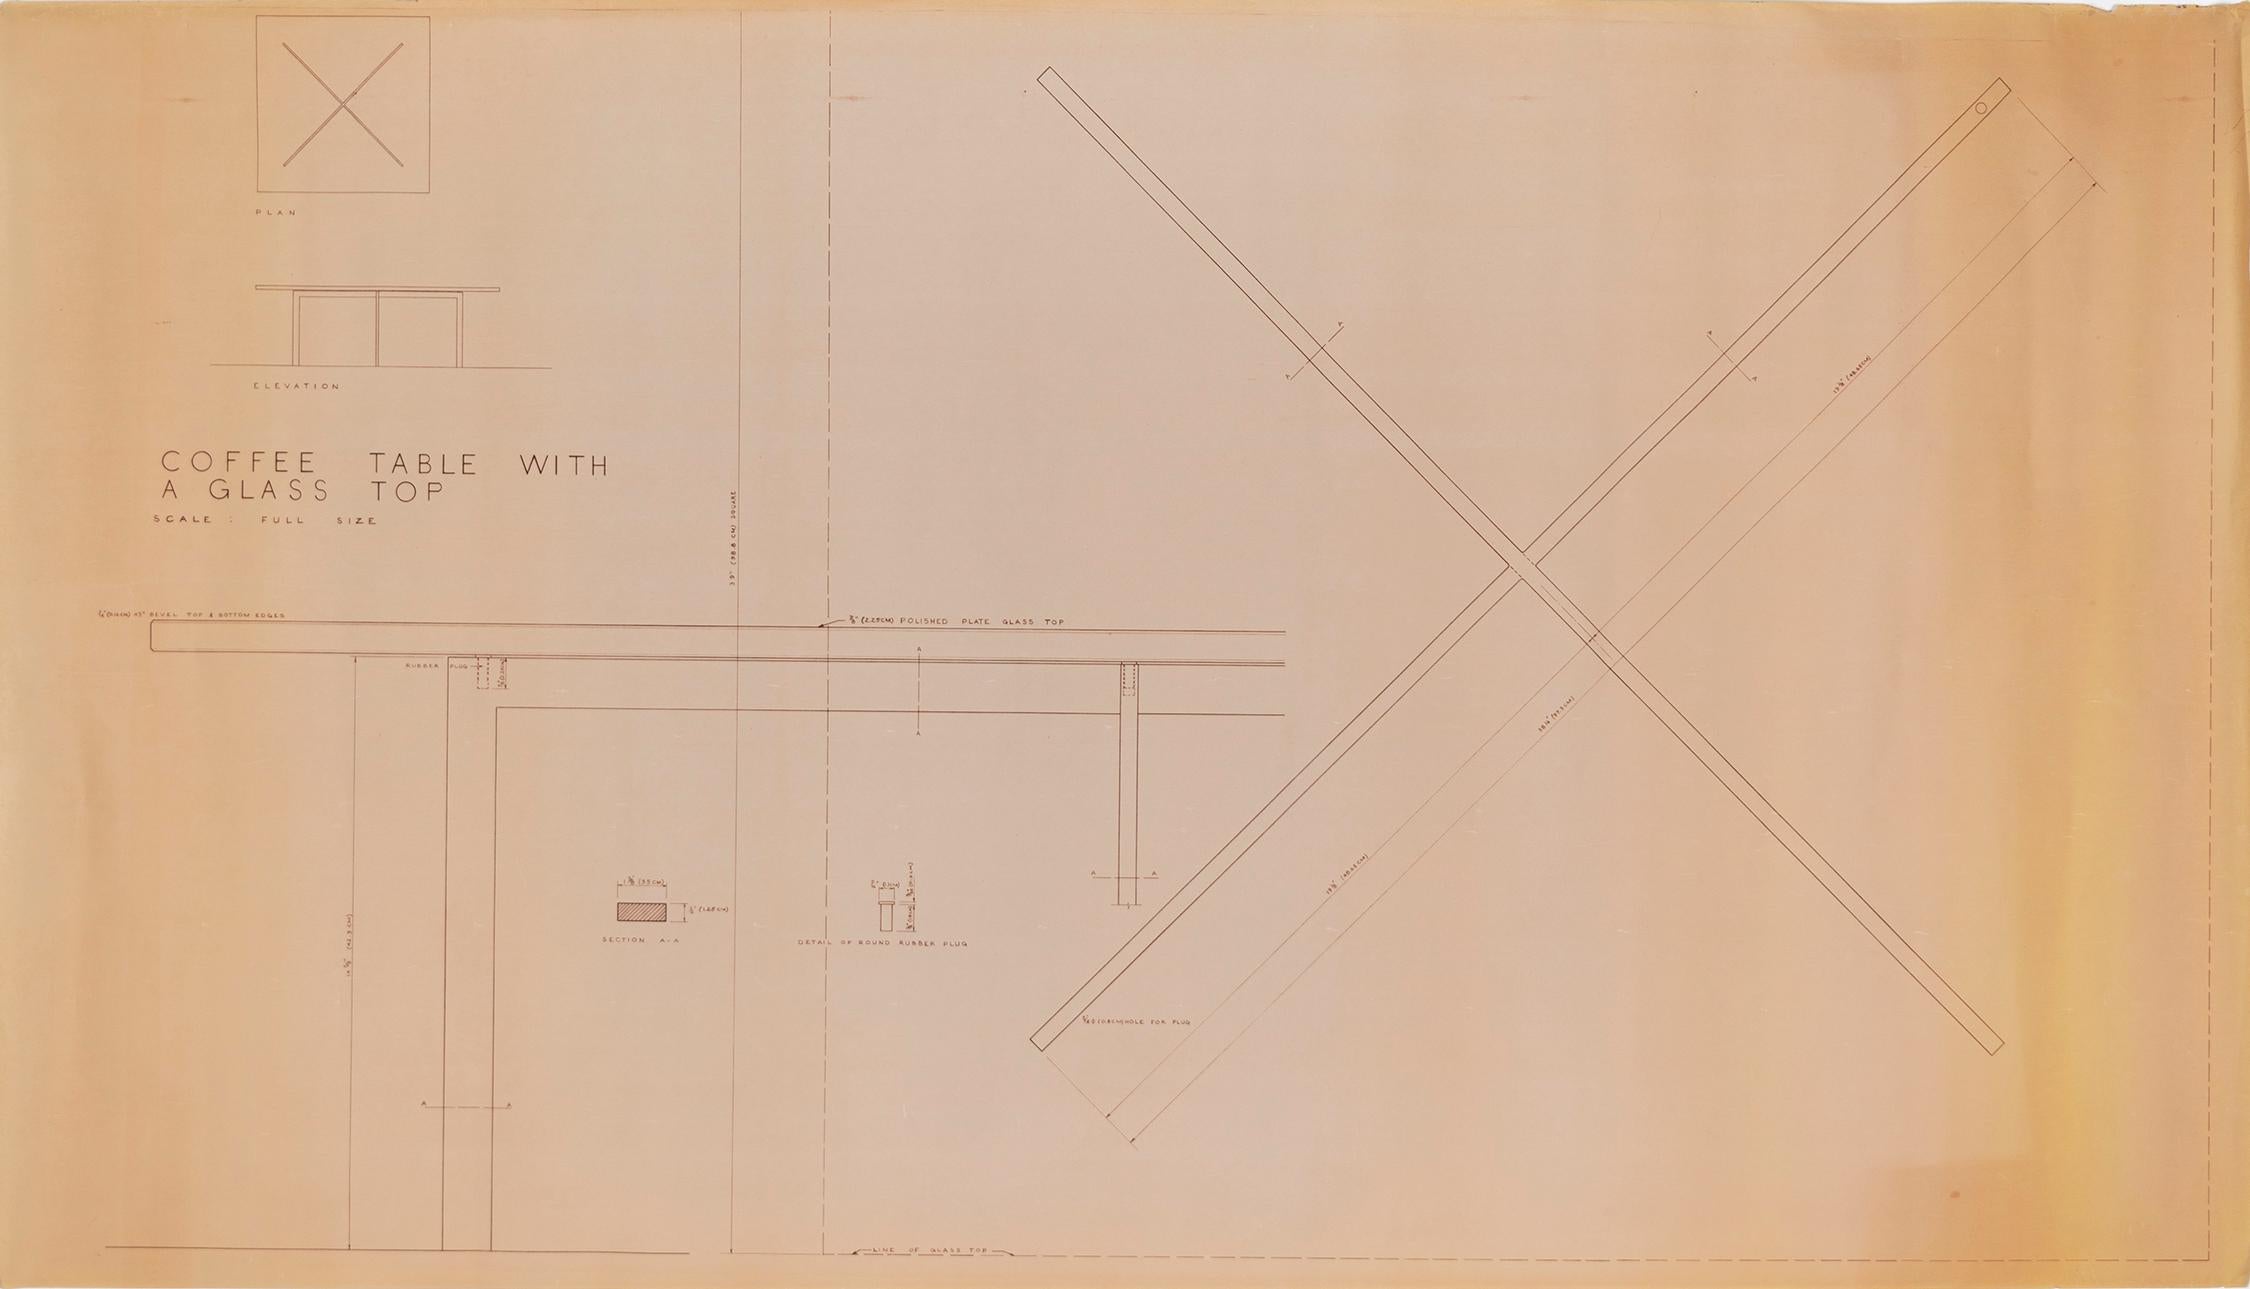 Coffee table design drawing

The office of Mies van der Rohe

Designed by Ludwig Mies van der Rohe in 1930 for the Tugendhat House in Brno, Czechoslovakia

Delineated by Edward A. Duckett, circa 1950s

Sepia print

Measures: 36” H x 64”